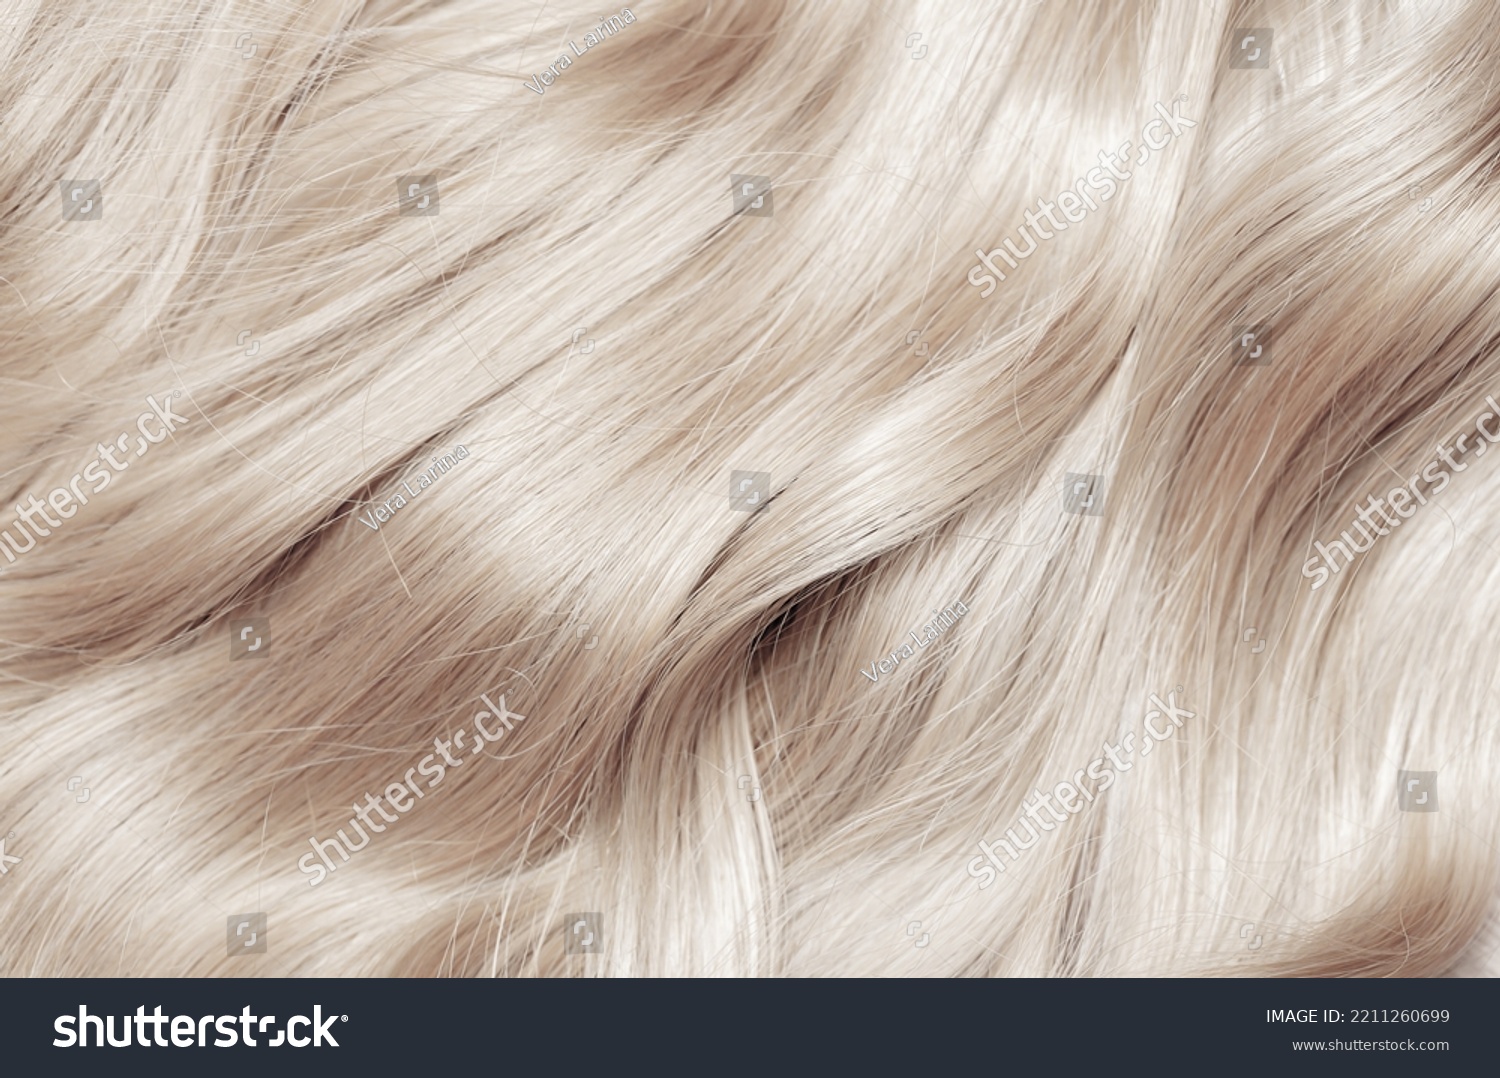 Blond hair close-up as a background. Women's long blonde hair. Beautifully styled wavy shiny curls. Hair coloring. Hairdressing procedures, extension. White hair #2211260699